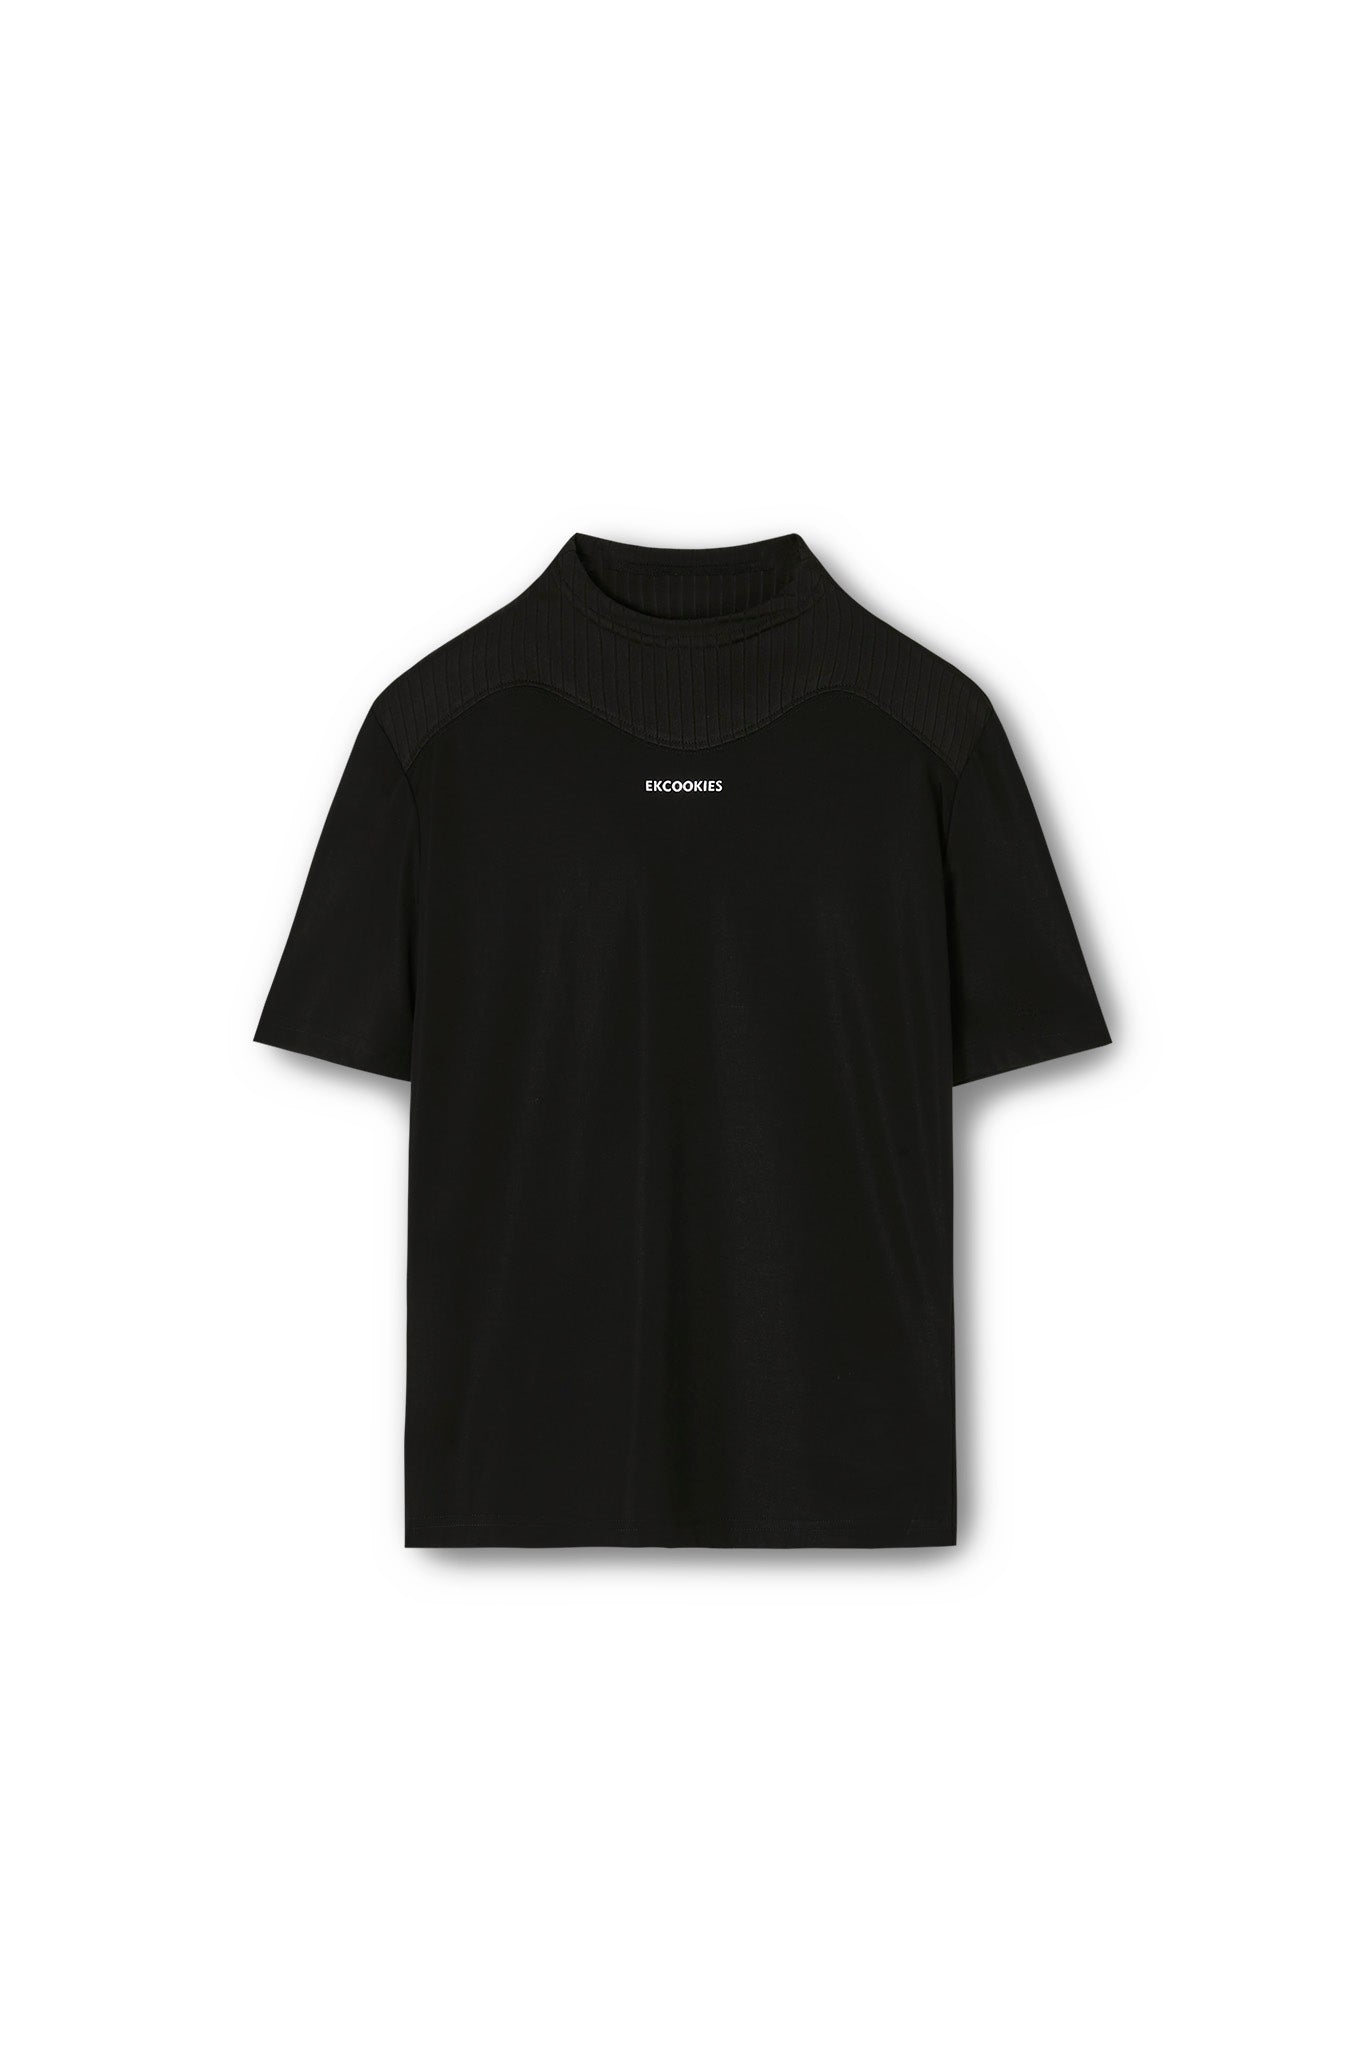 Front logo print petite high neck cut and sew / T-shirt 